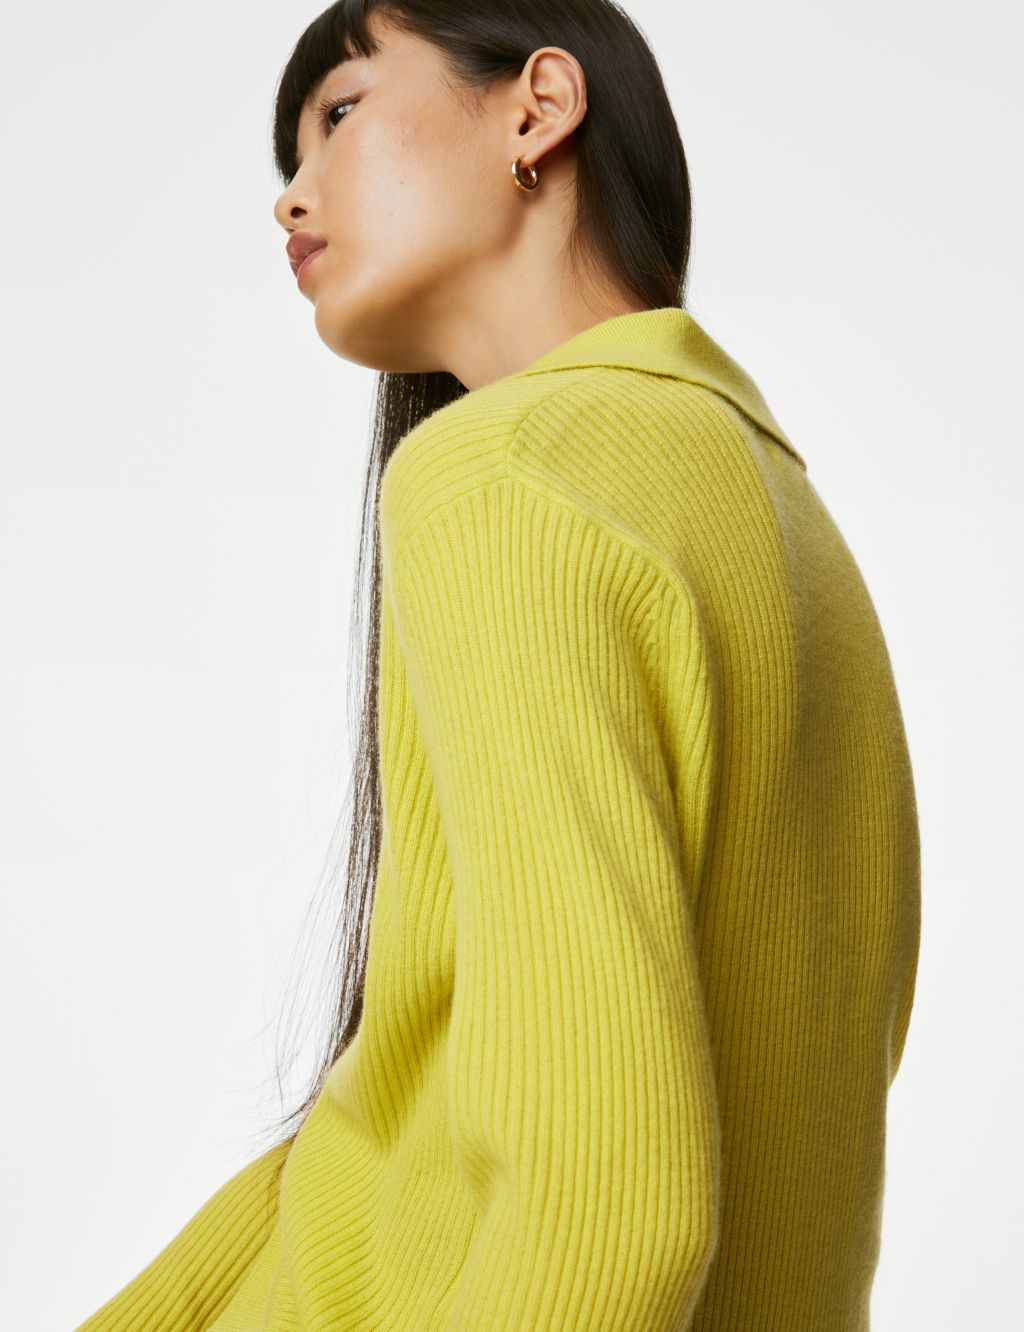 Merino Wool with Cashmere Collared Jumper image 3